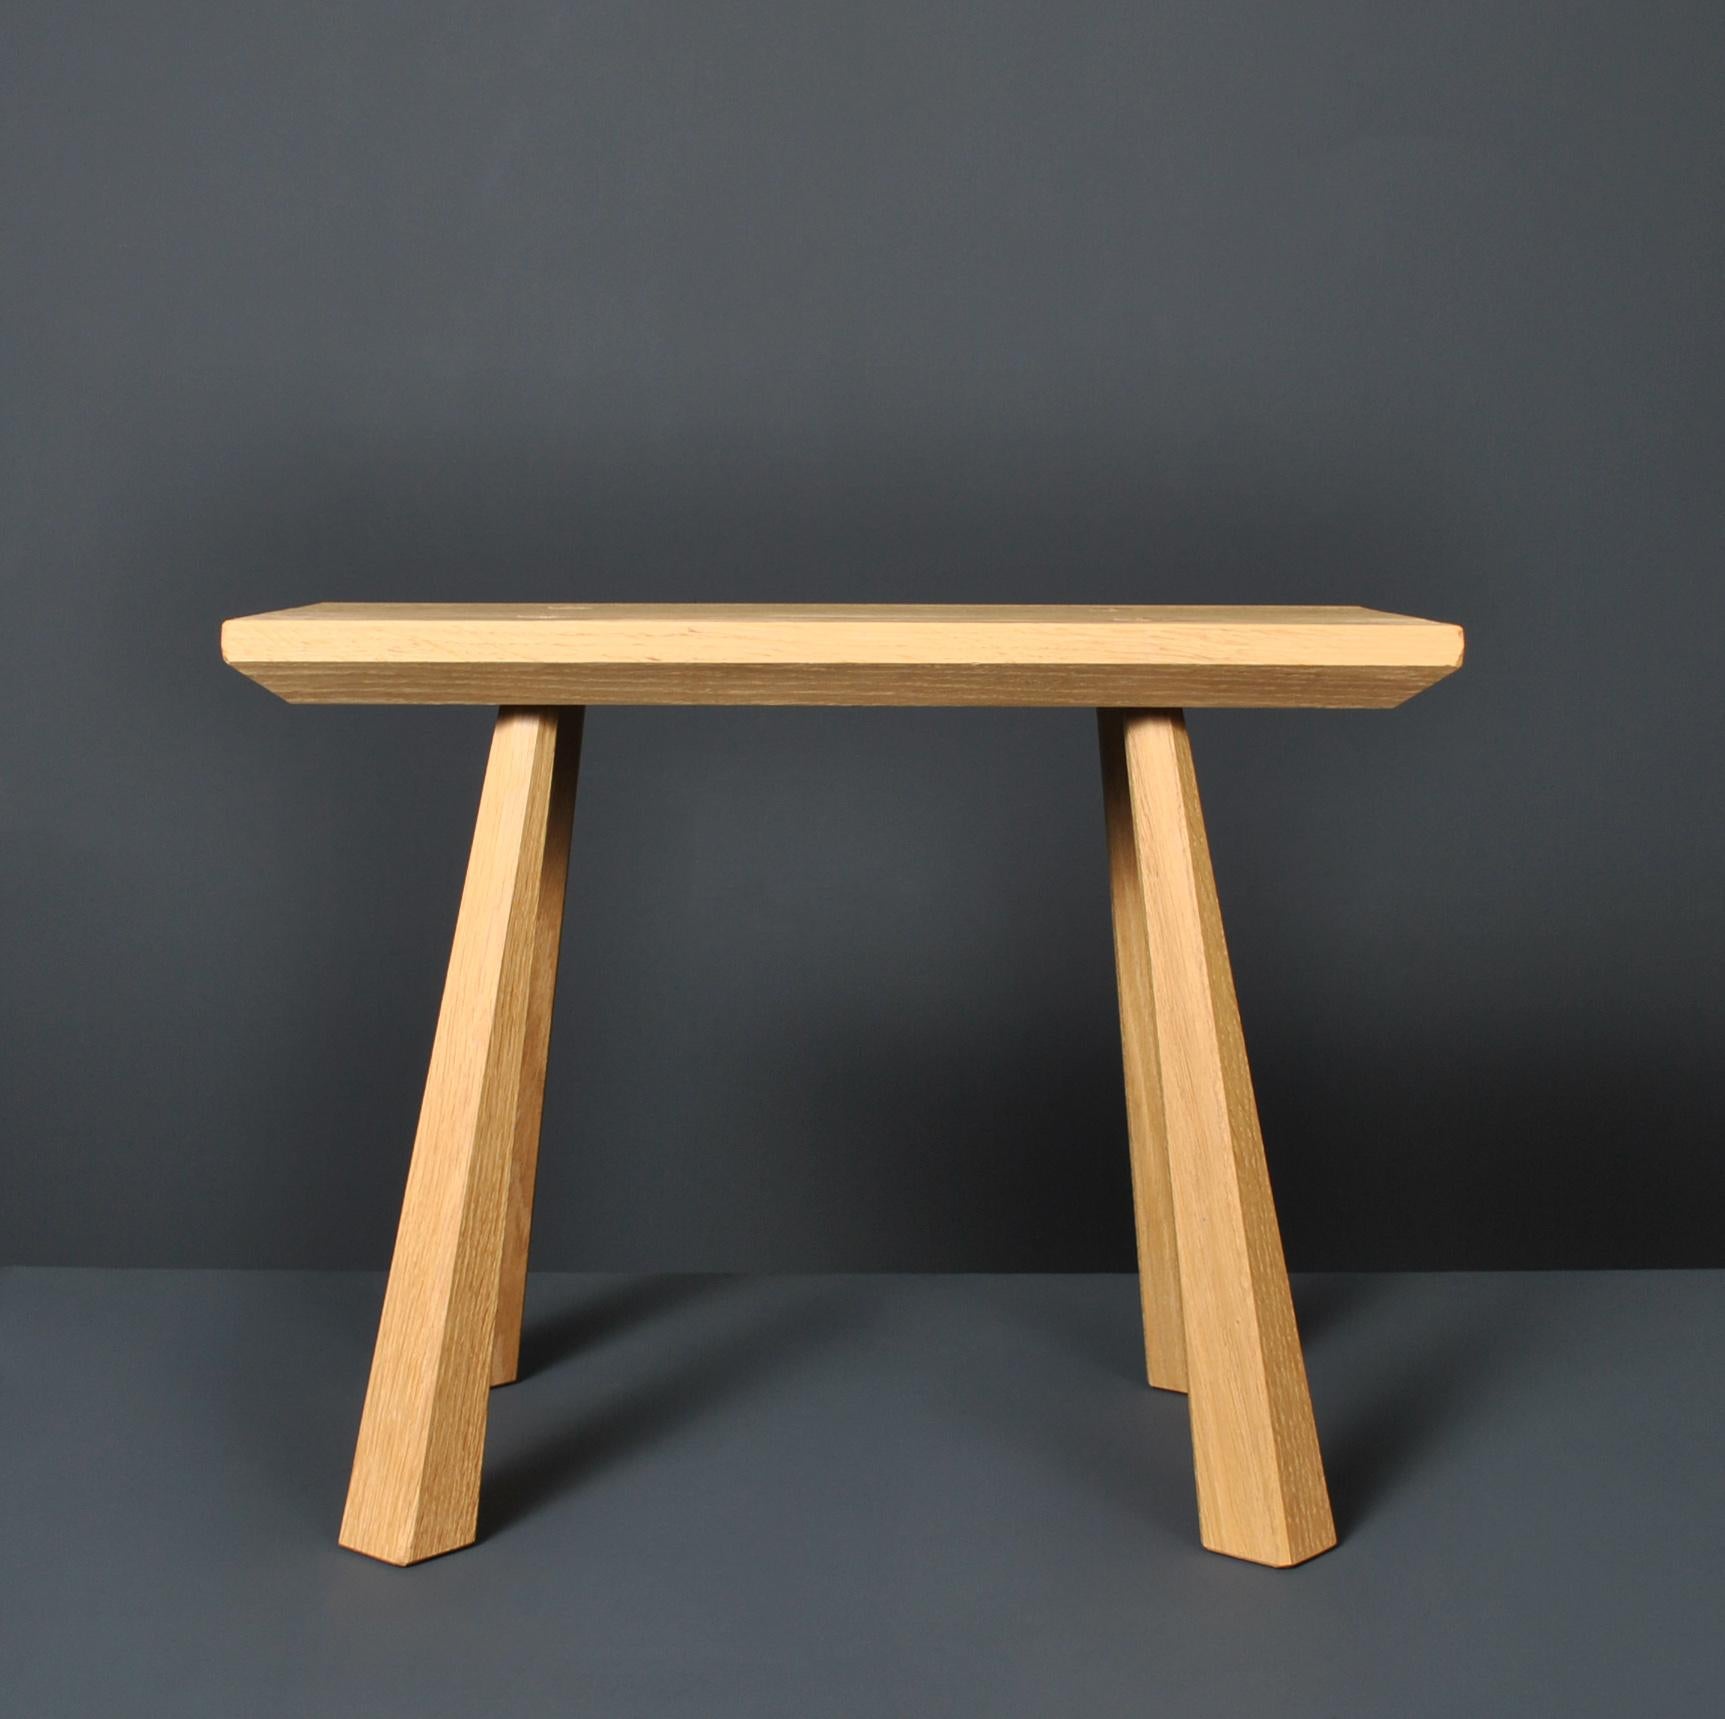 English Handcrafted Oak Single Seat Bench For Sale